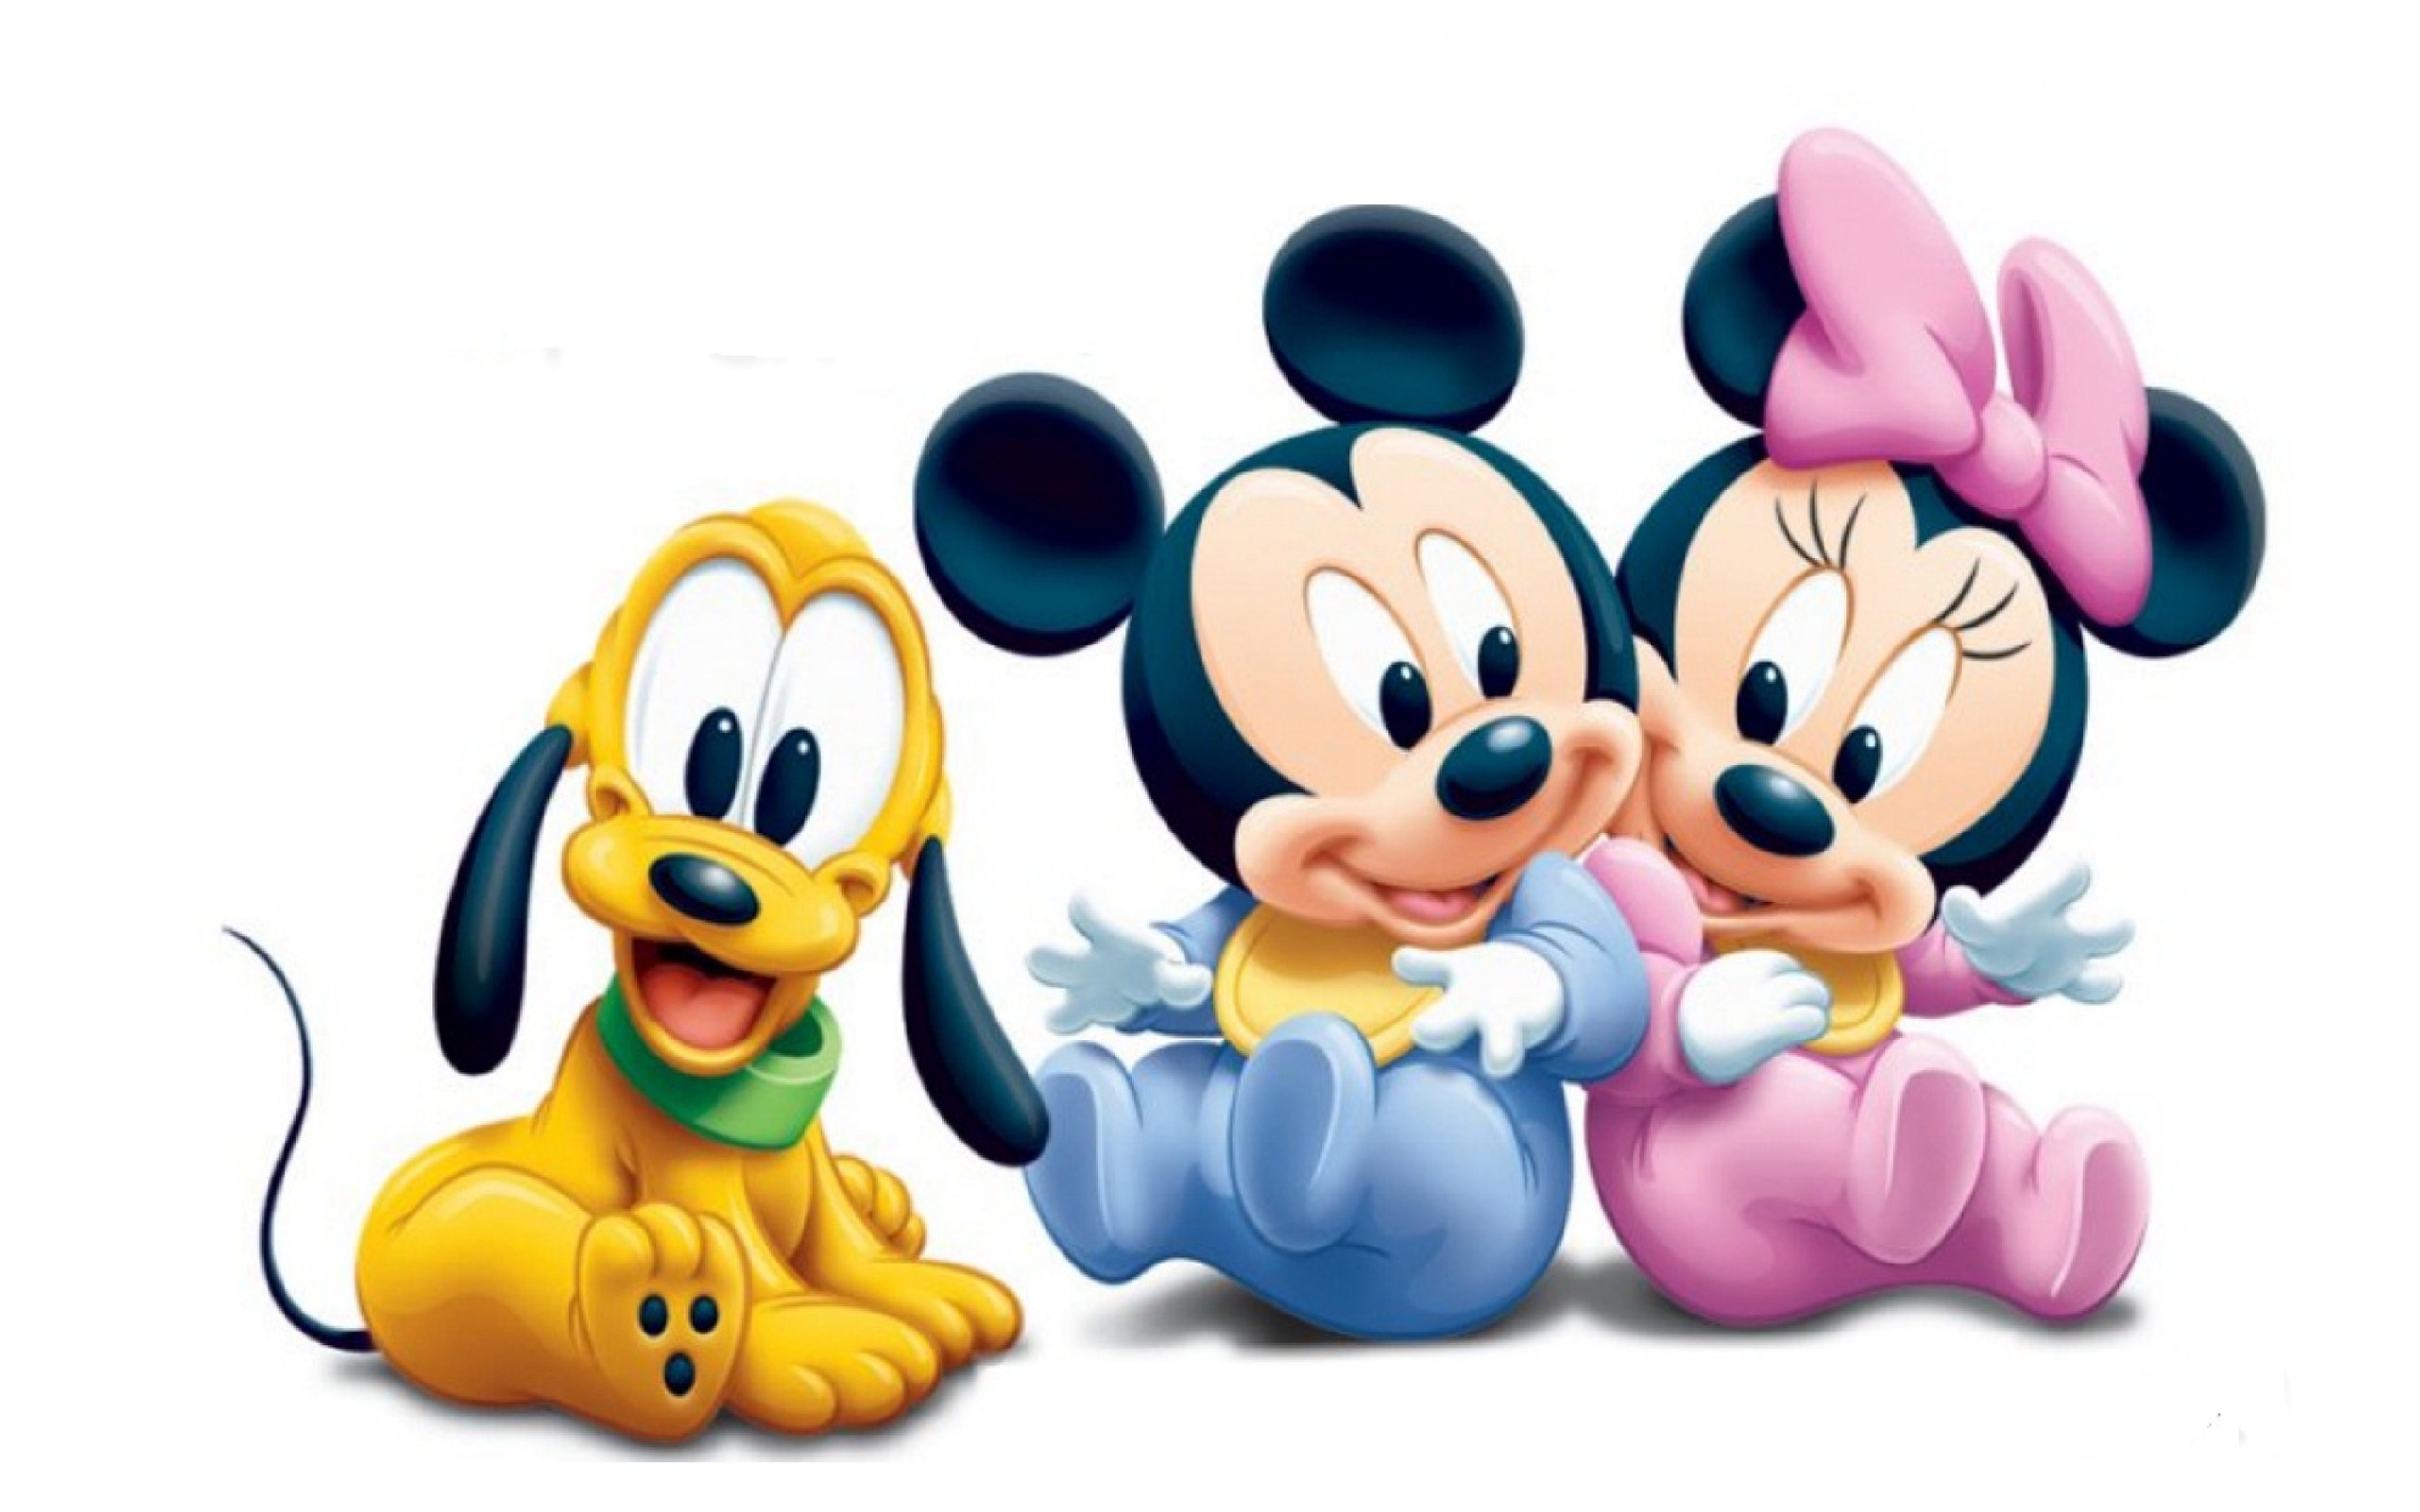 Mickey Mouse Pluto And Minnie Mouse As